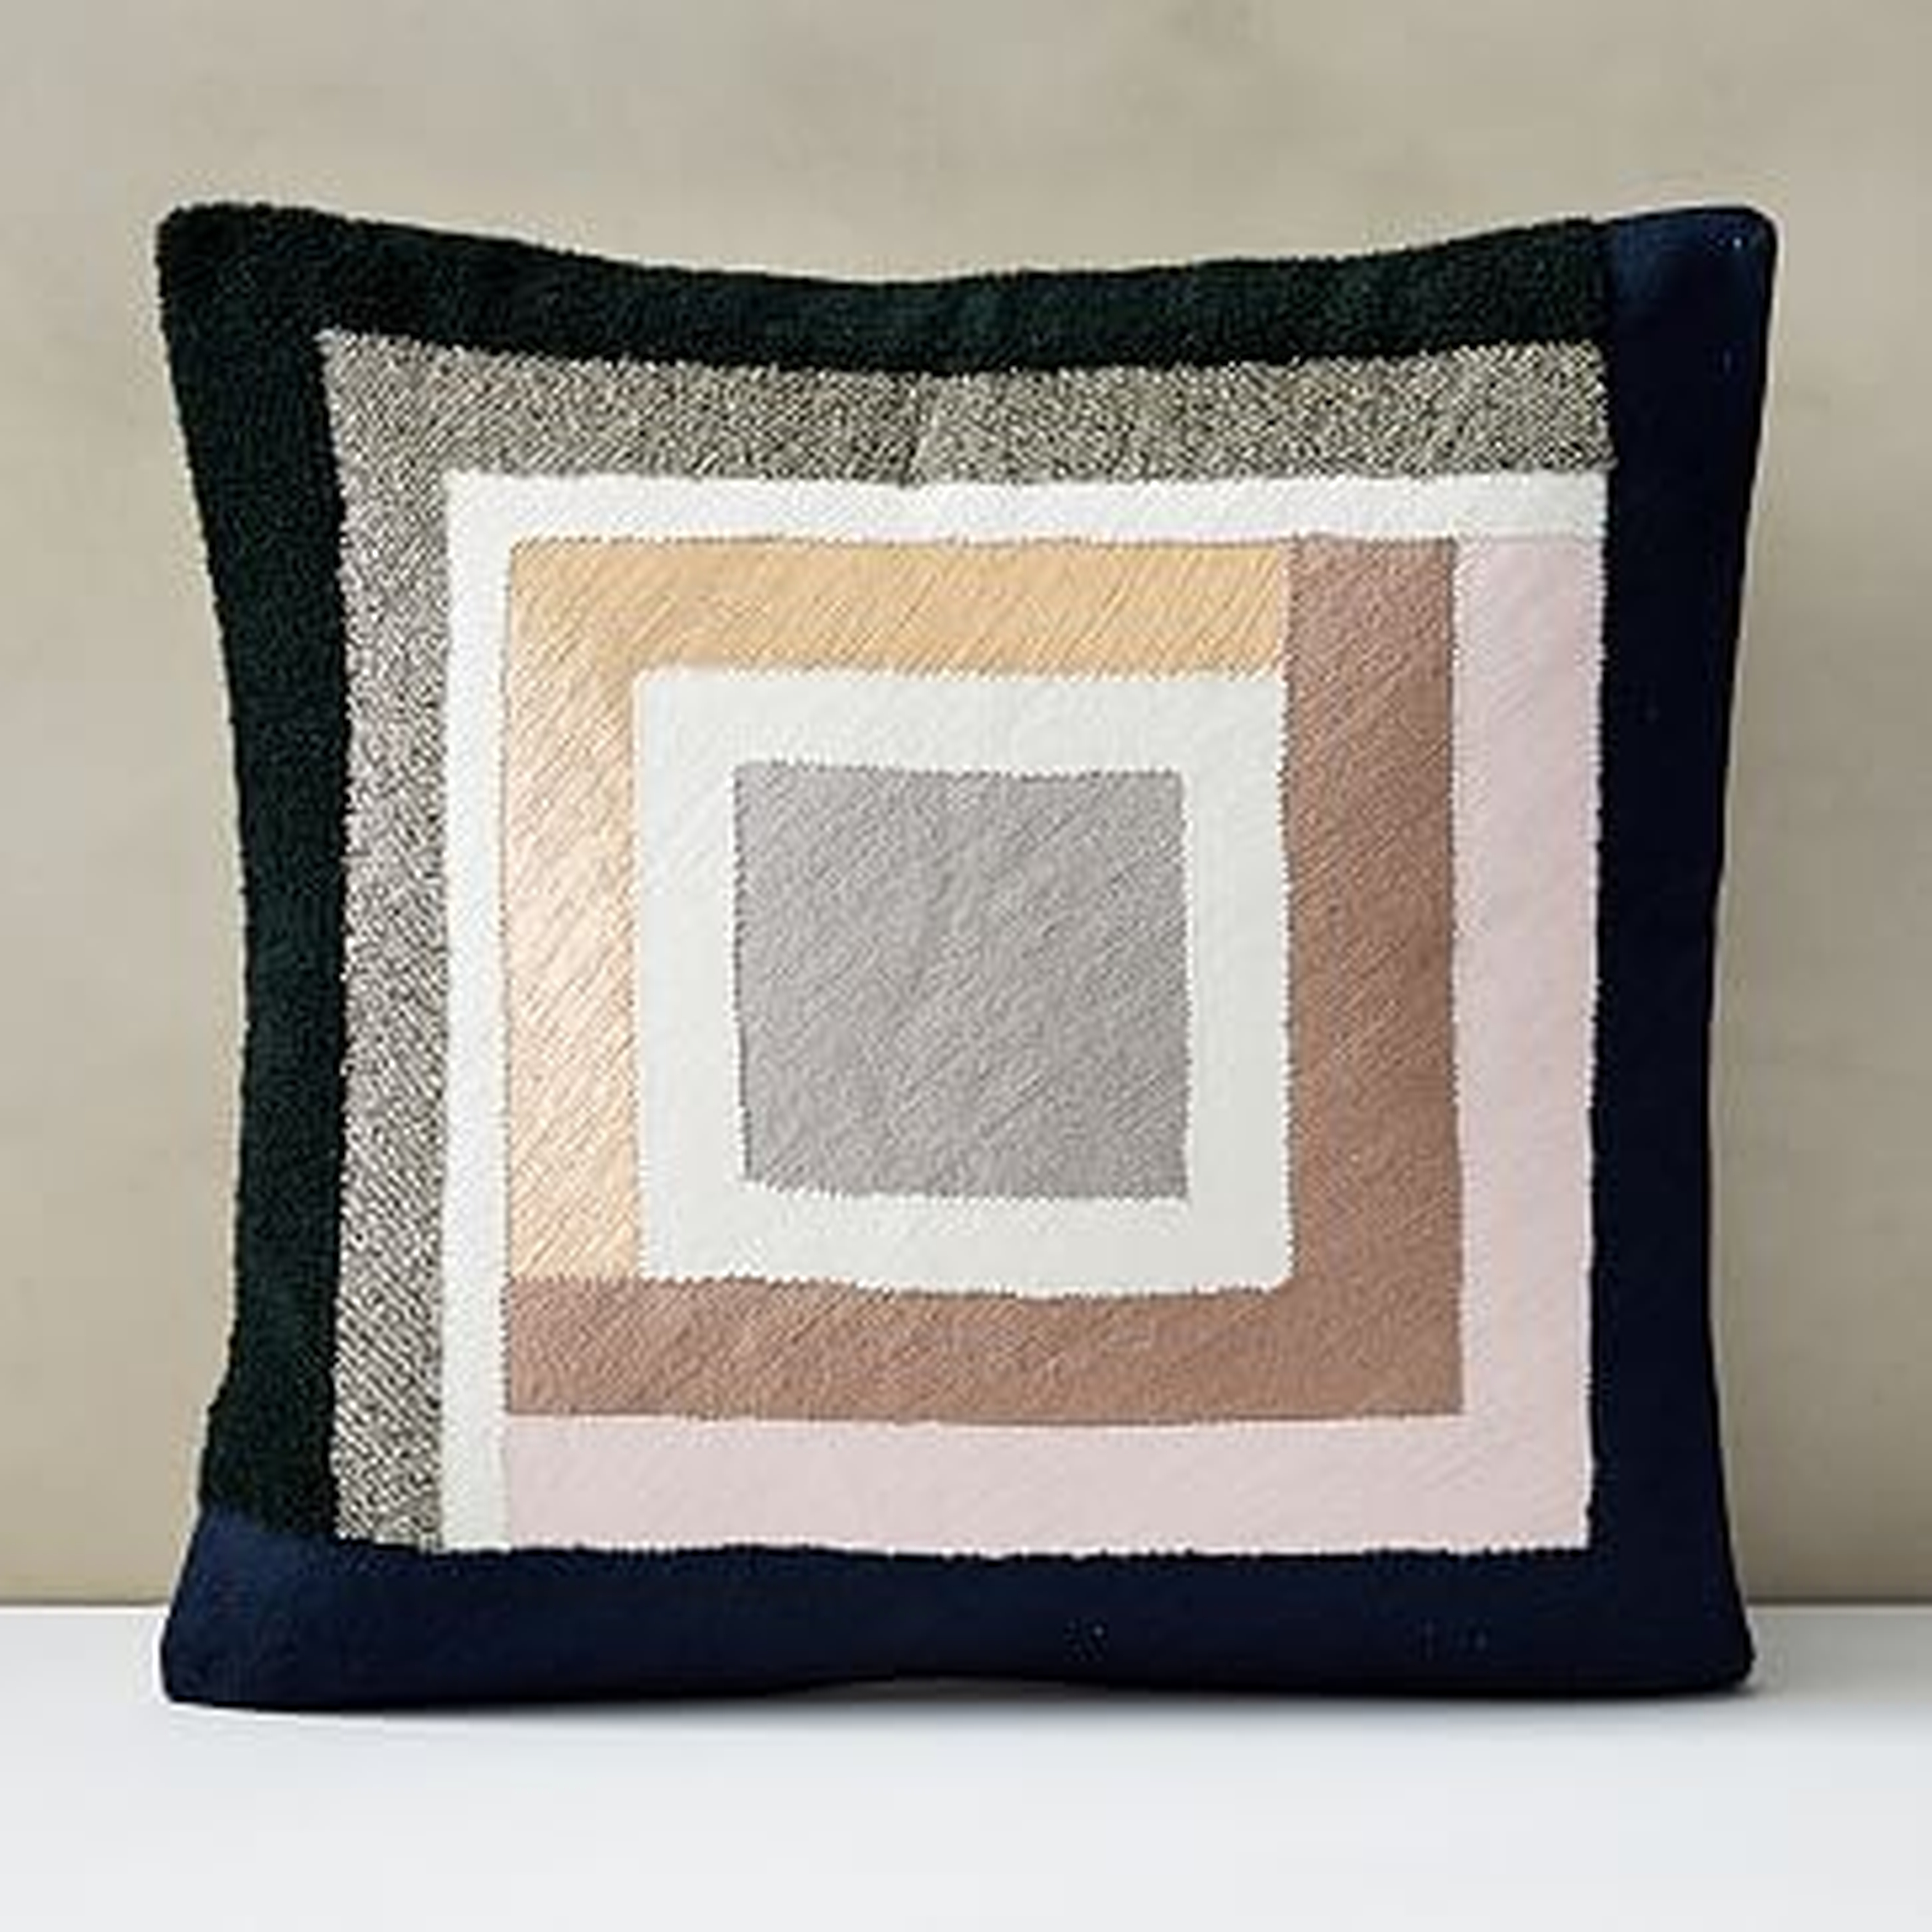 Embellished Deco Colorblock Pillow Cover, 20"x20", Multi - West Elm